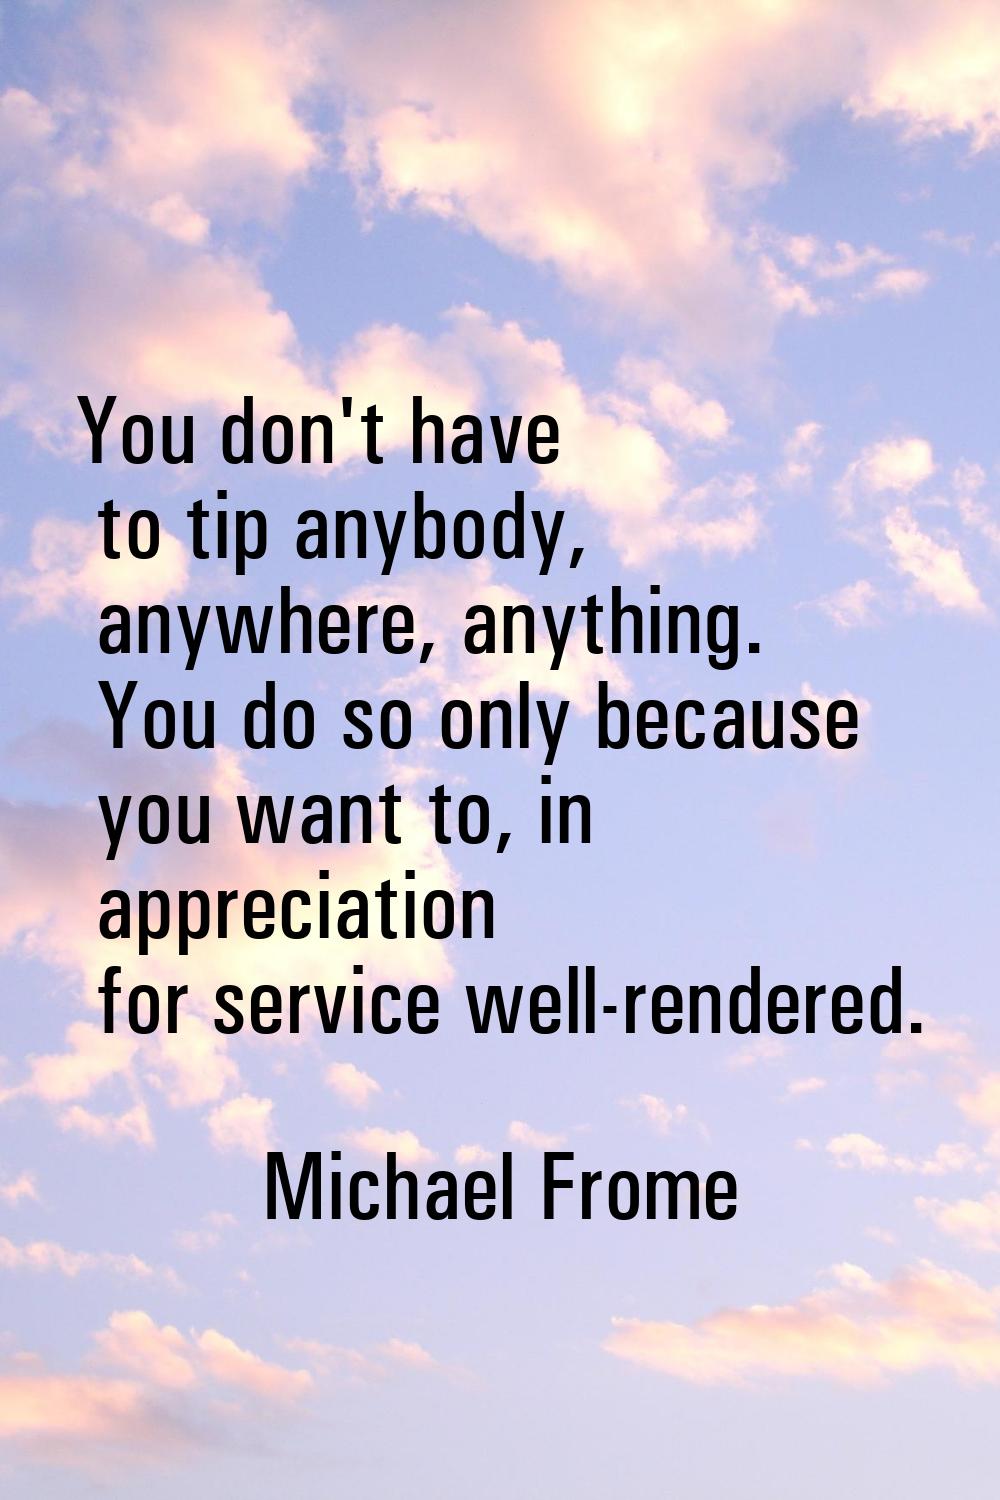 You don't have to tip anybody, anywhere, anything. You do so only because you want to, in appreciat